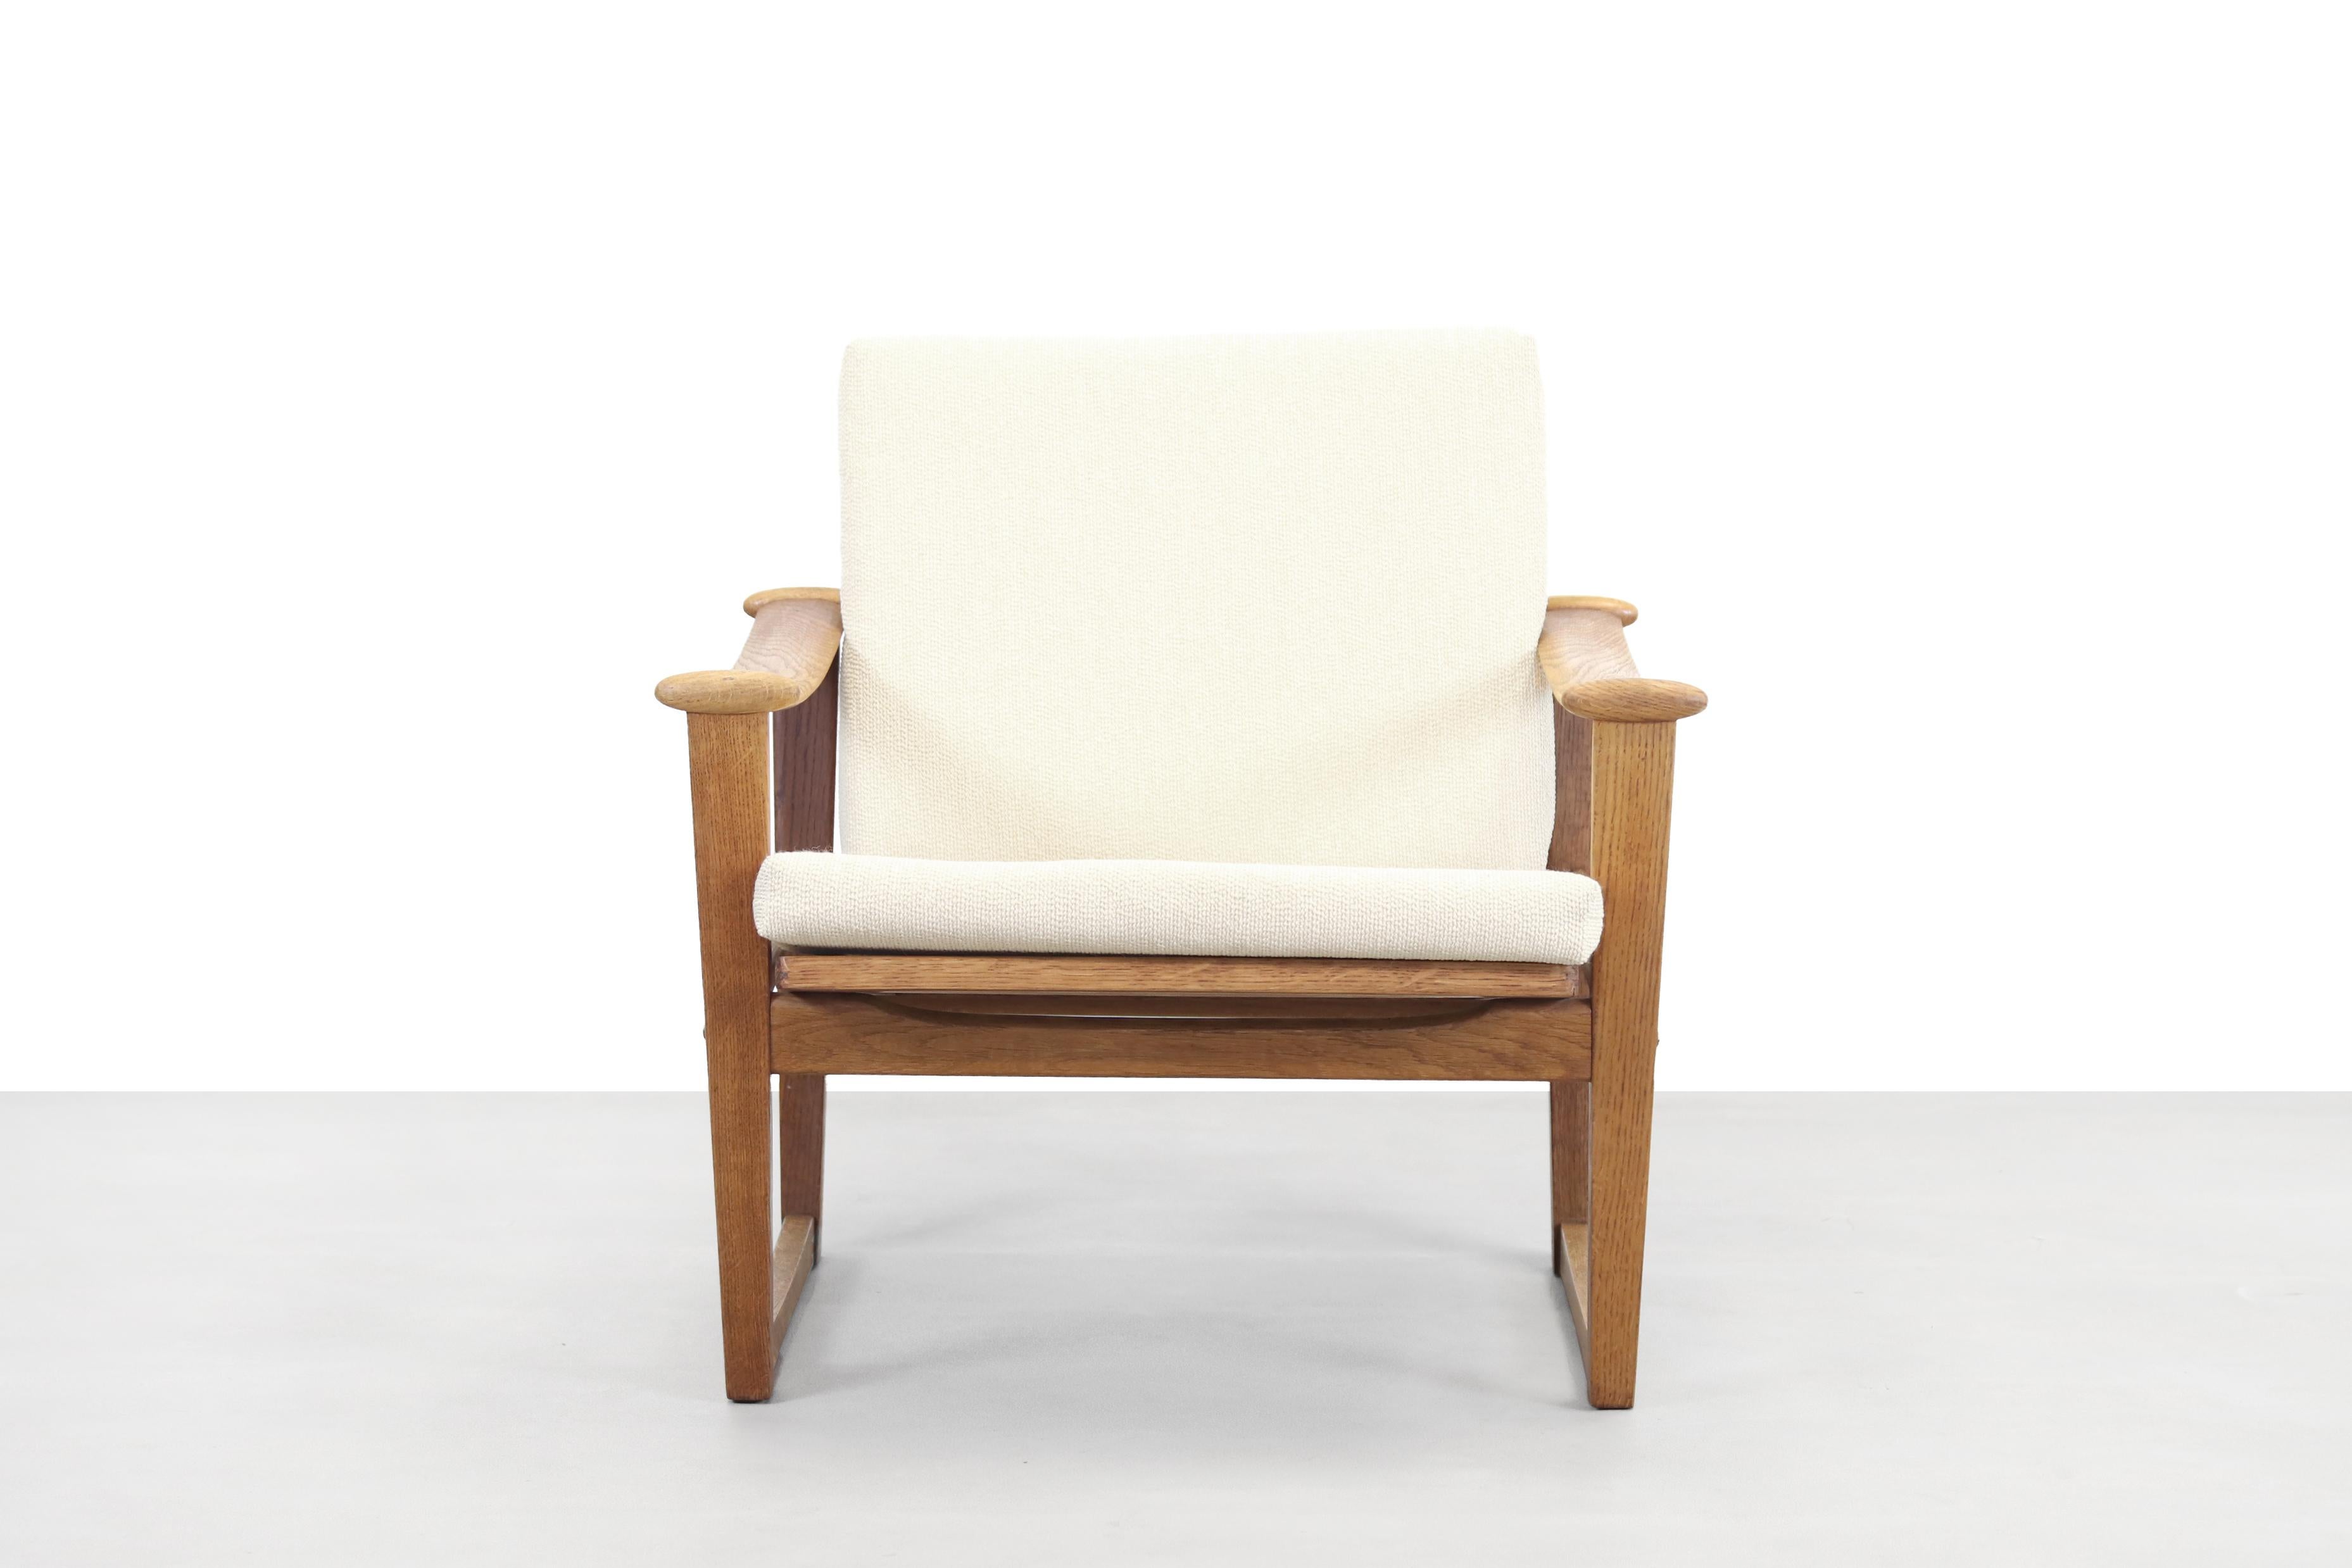 This Oak armchair is designed by M. Nissen and sold in the Netherlands by the Dutch manufacturer Pastoe. This armchair is often attributed online to Finn Juhl, but despite its many similarities, Finn Juhl is not the designer of this chair. The frame